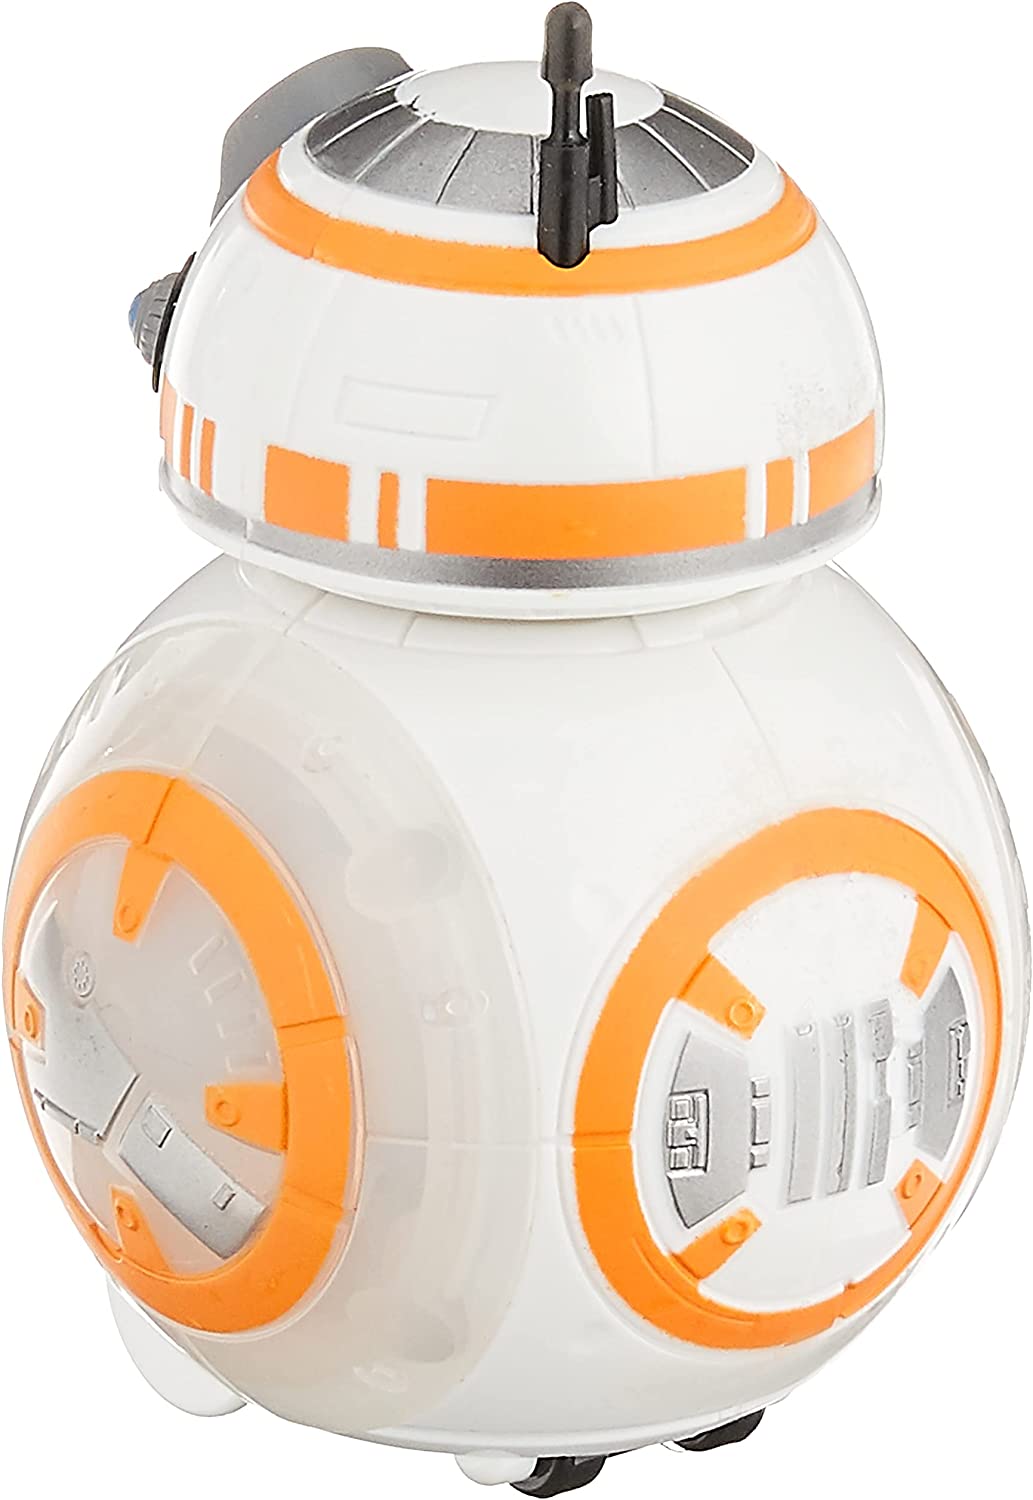 New Rise Of Skywalker Spark And Go Bb 8 Rolling Astromech Droid Toy Available The Force Awakens 8708